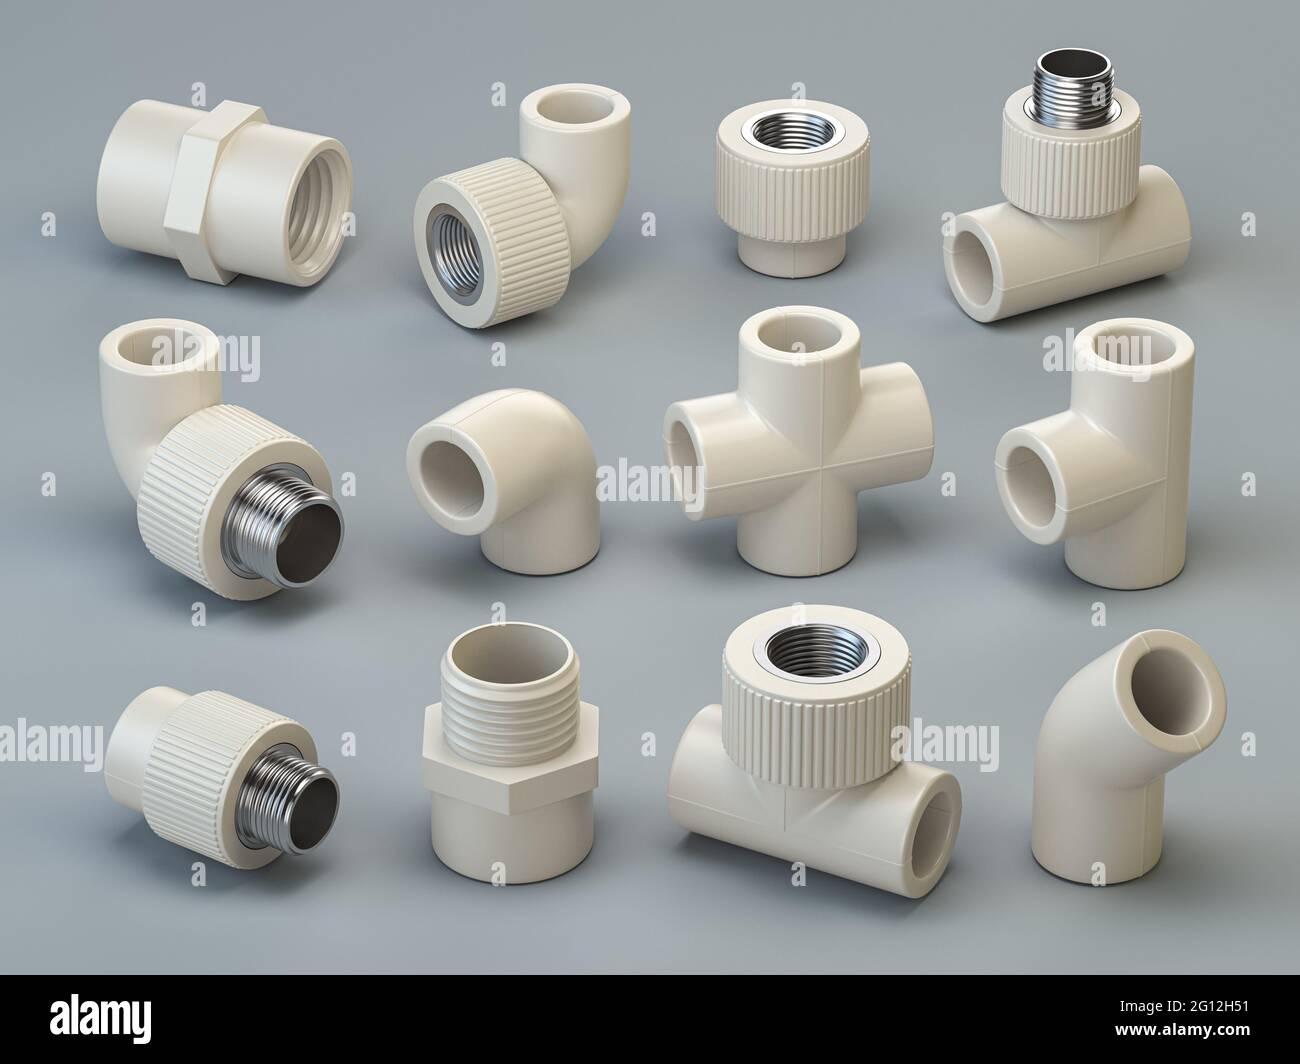 Set of PVC pipe fittings on grey background. 2d illustration. Stock Photo